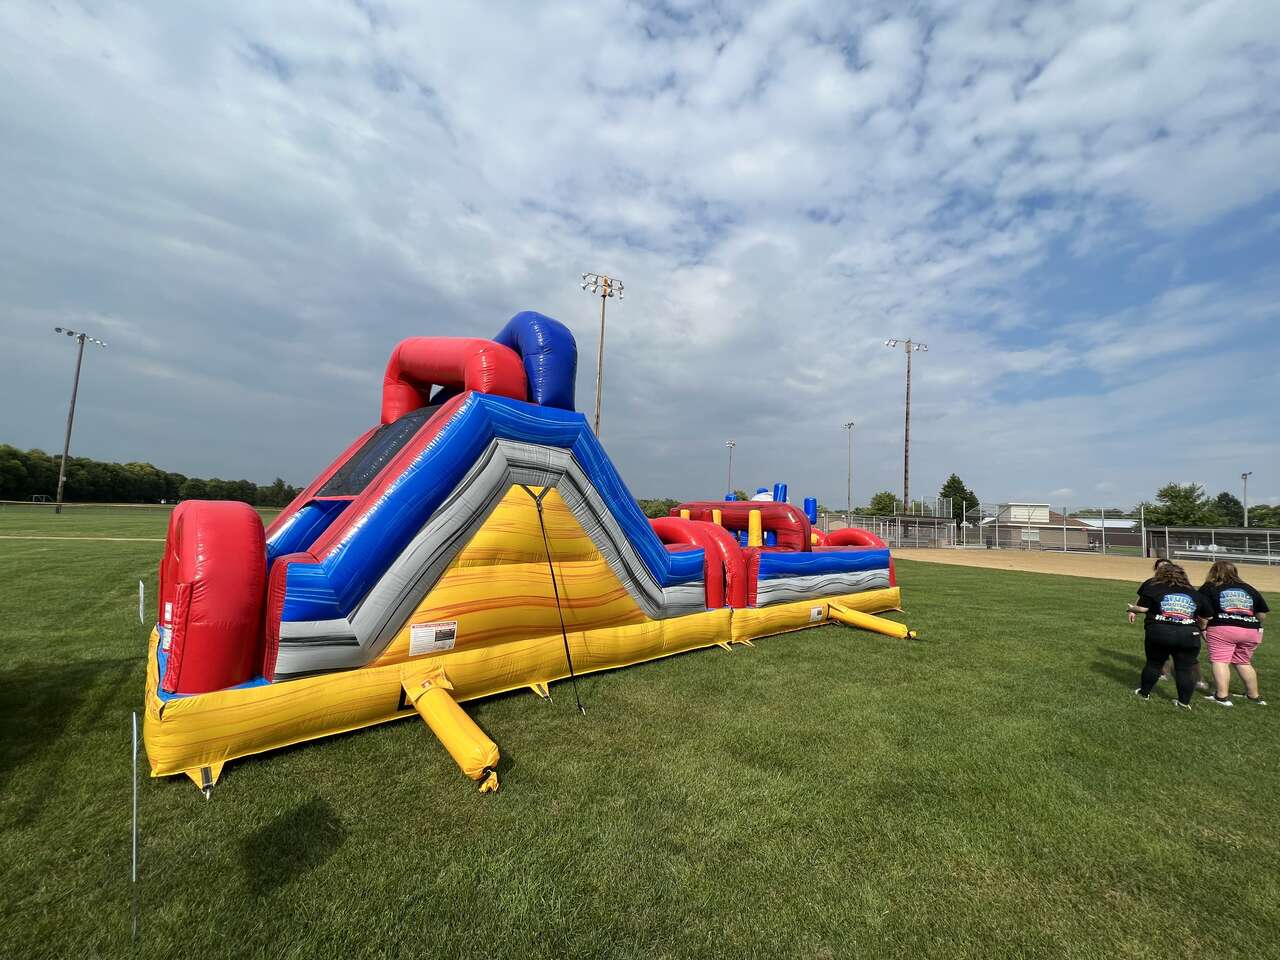 obstacles courses rental, from Fun Bounces Rental in Naperville IL 60540